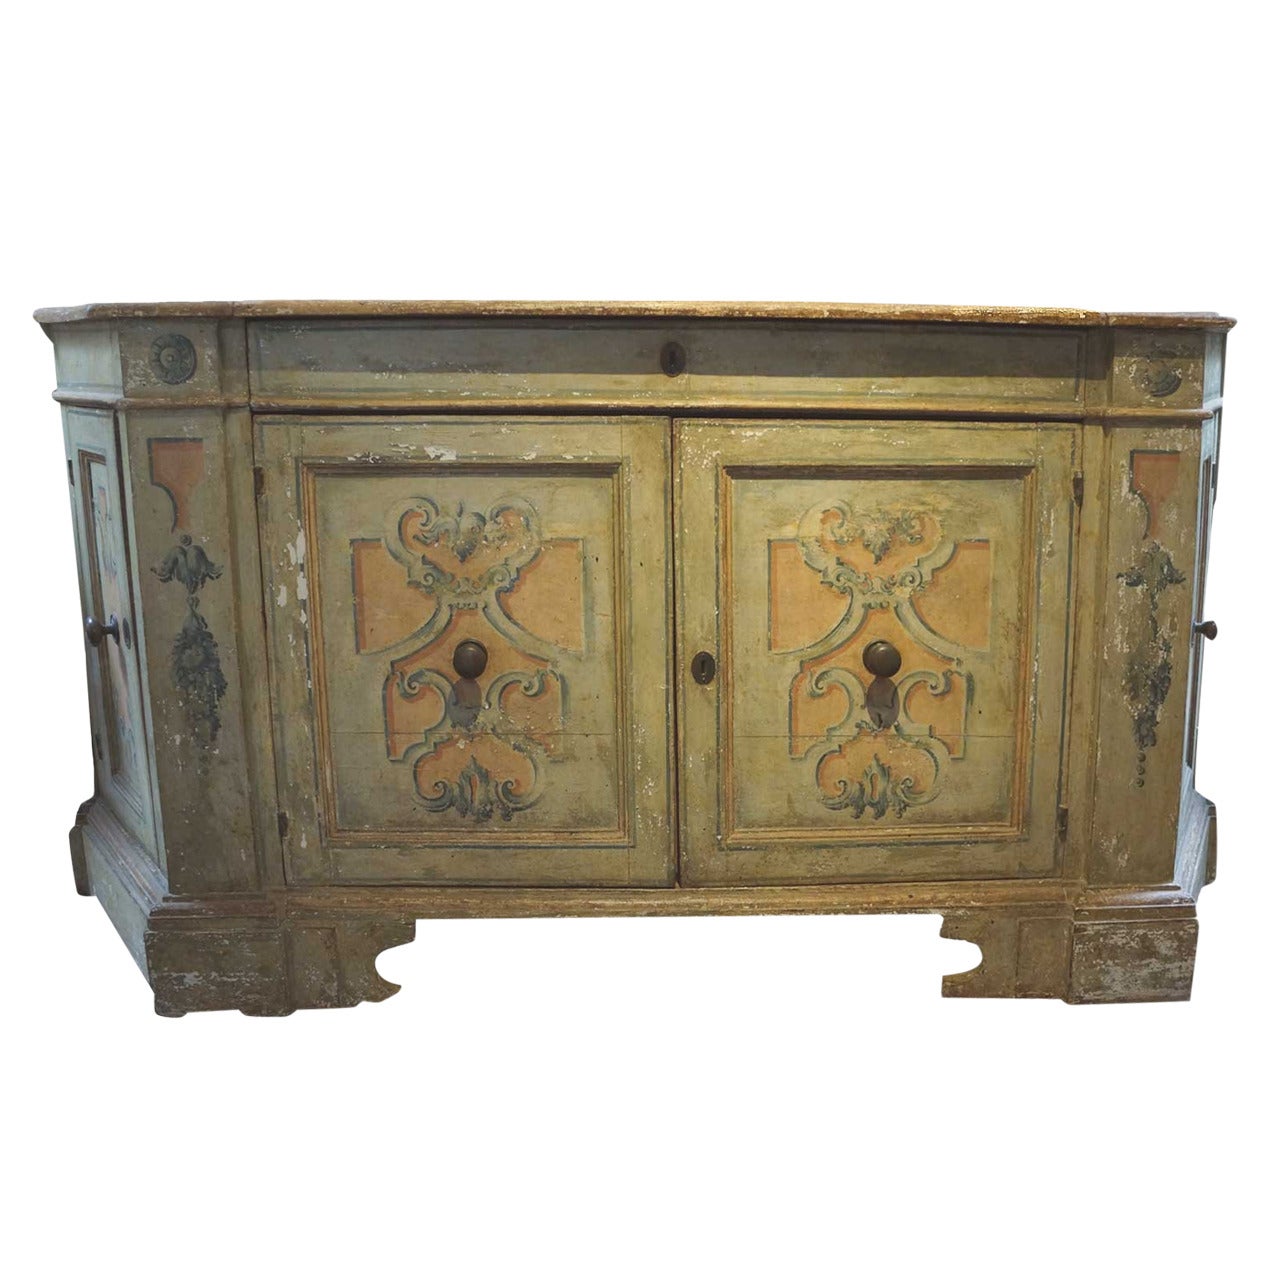 18th Century Italian Painted Credenza with Original Paint